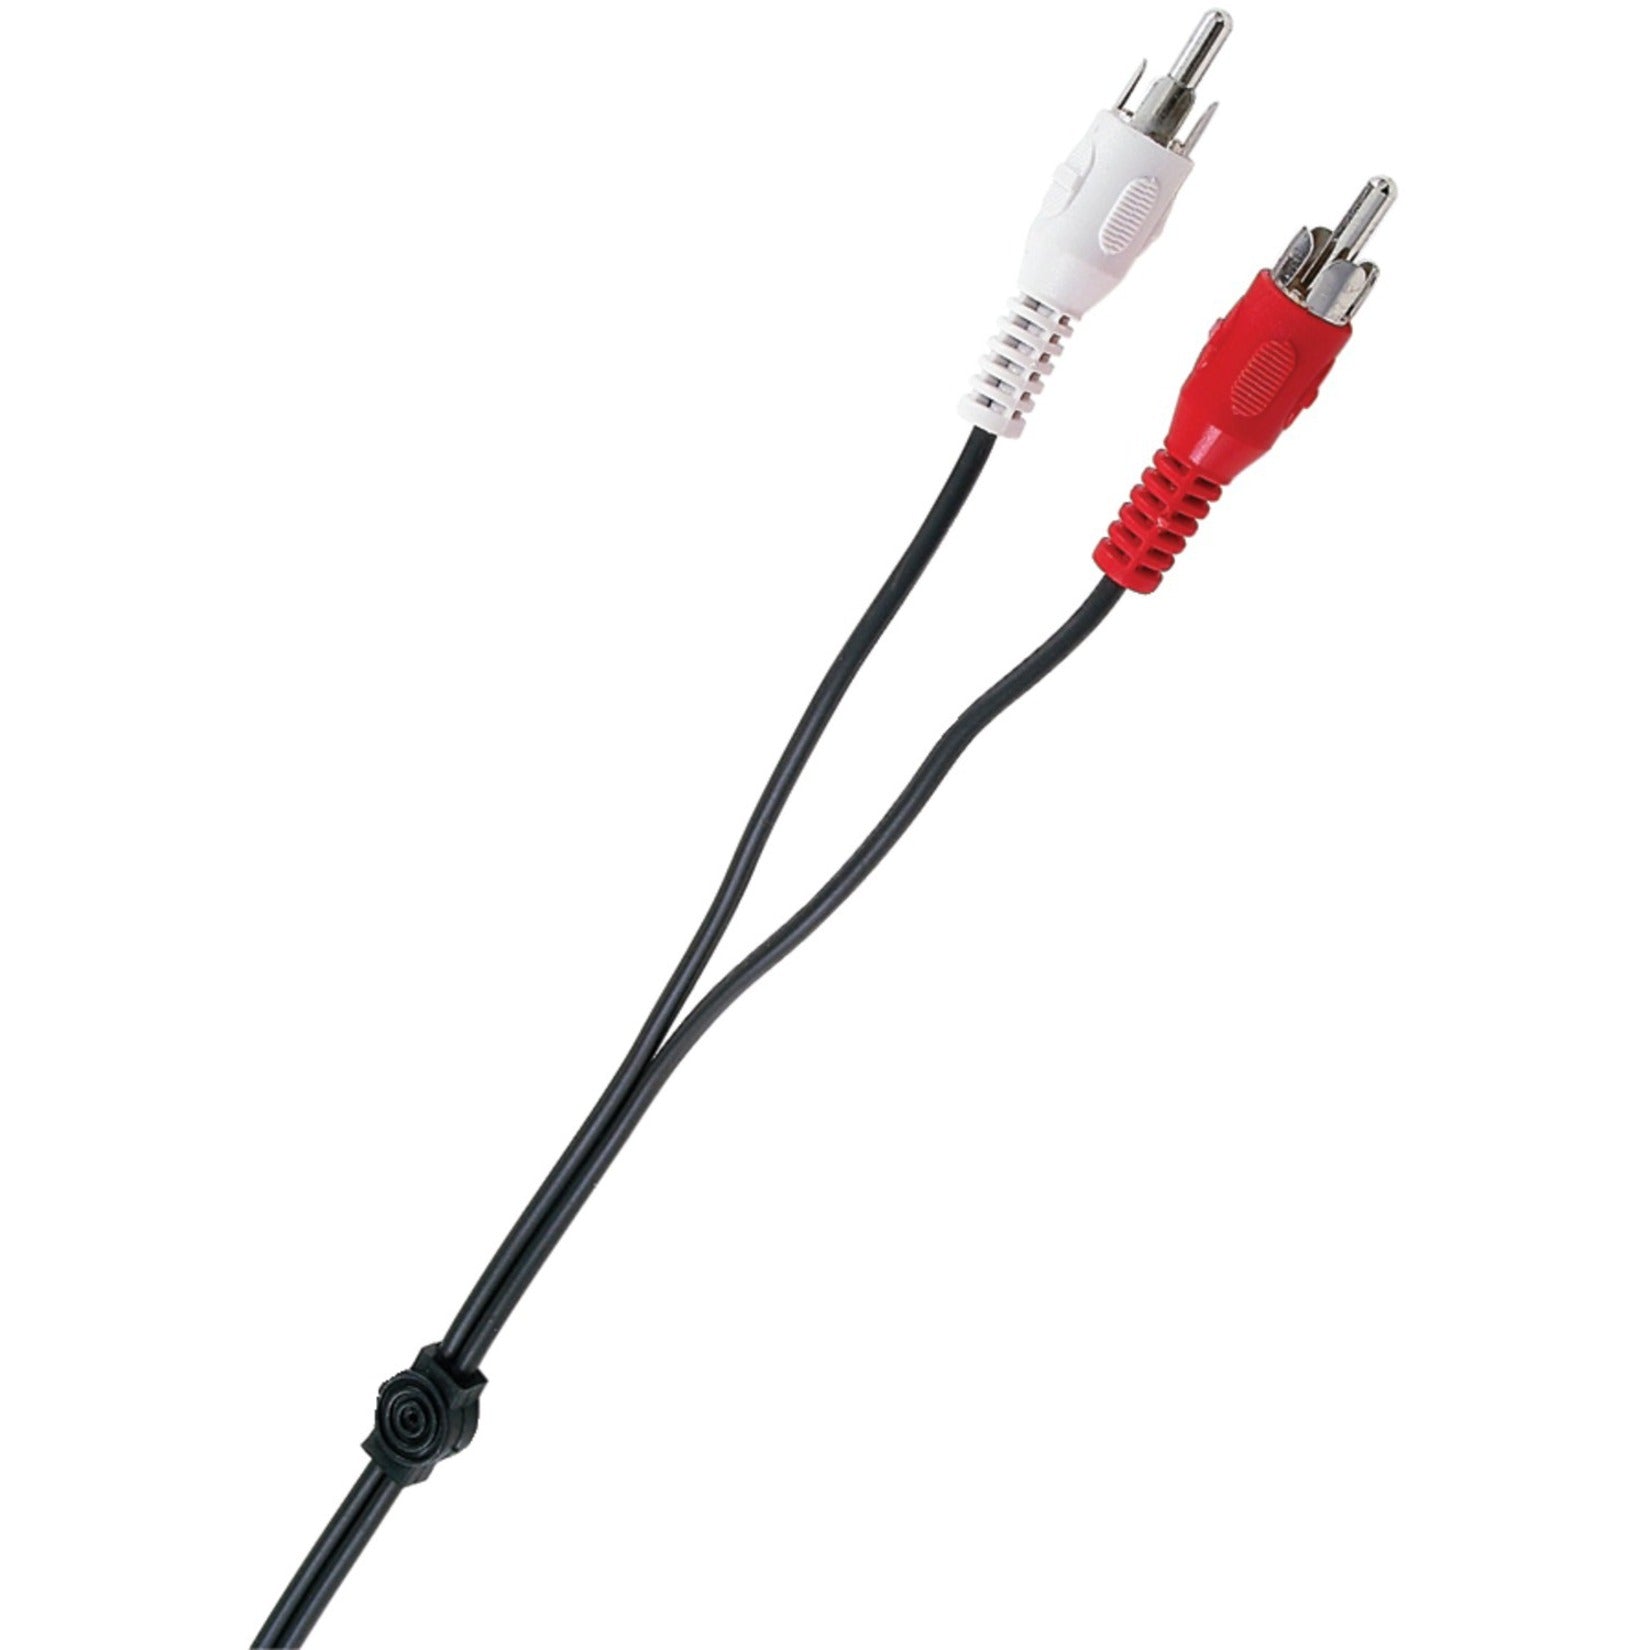 AXIS ELR,CA148 3' Stereo Audio Cable - High-Quality RCA Male Connectors [Discontinued]